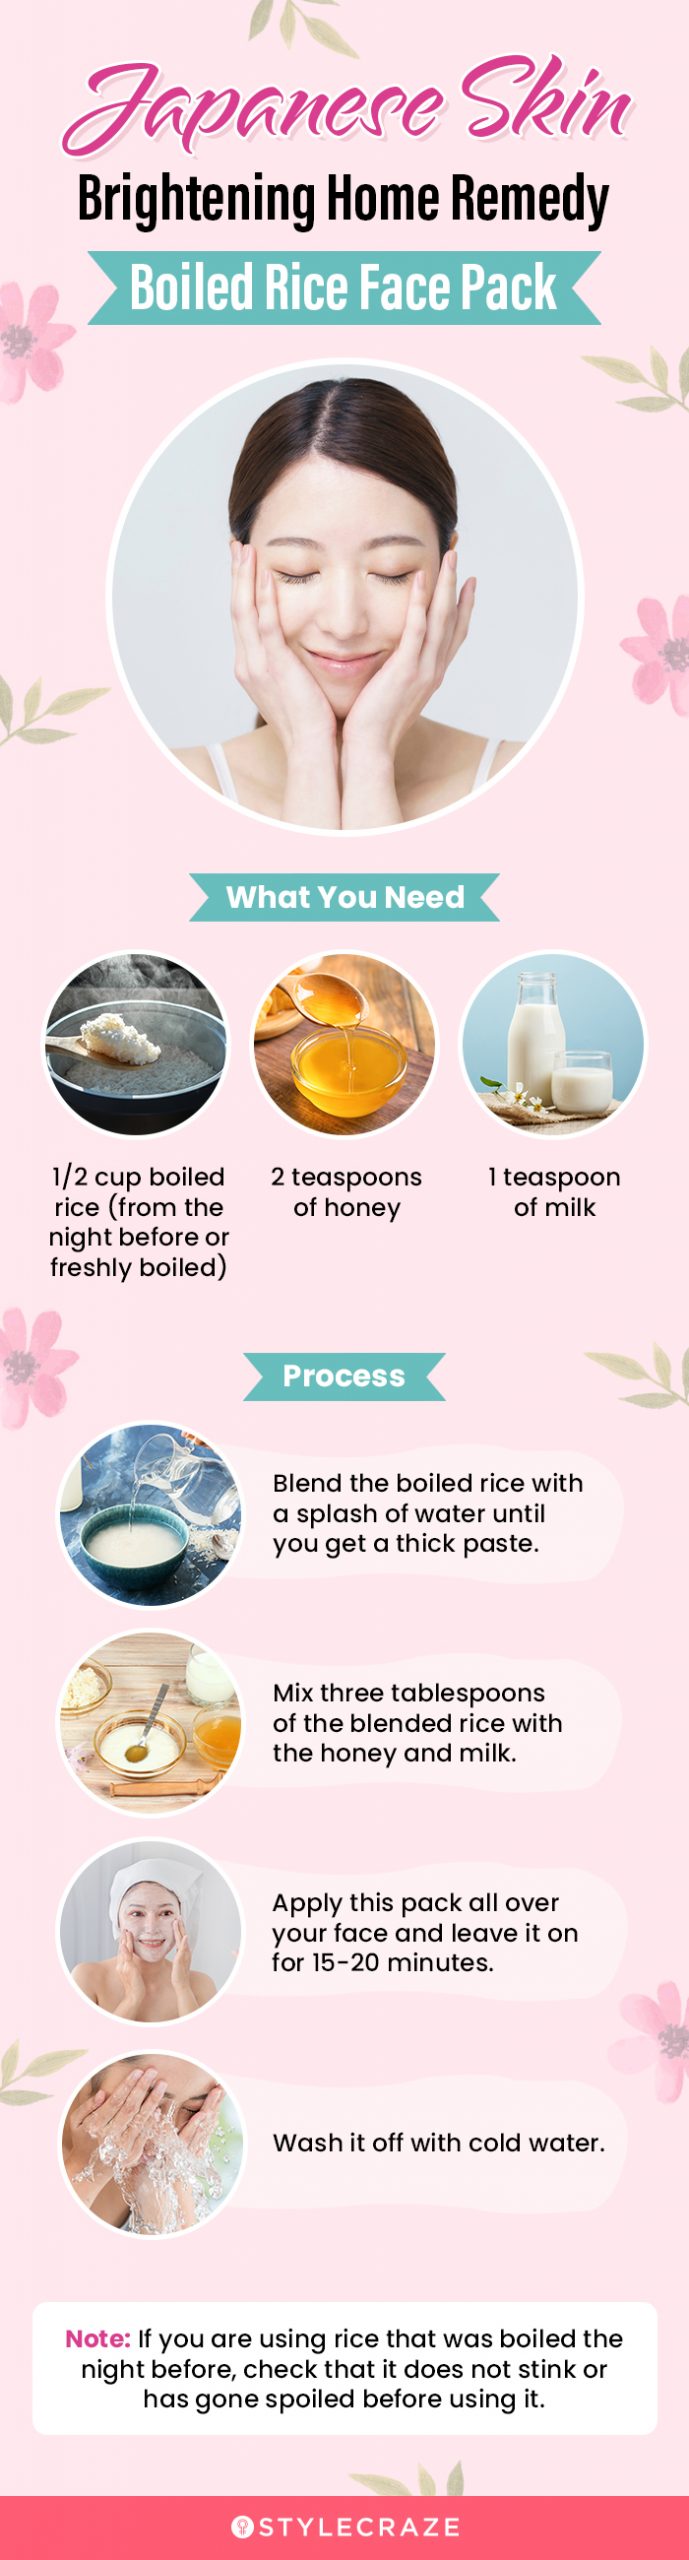 japanese skin brightening home remedy [infographic]